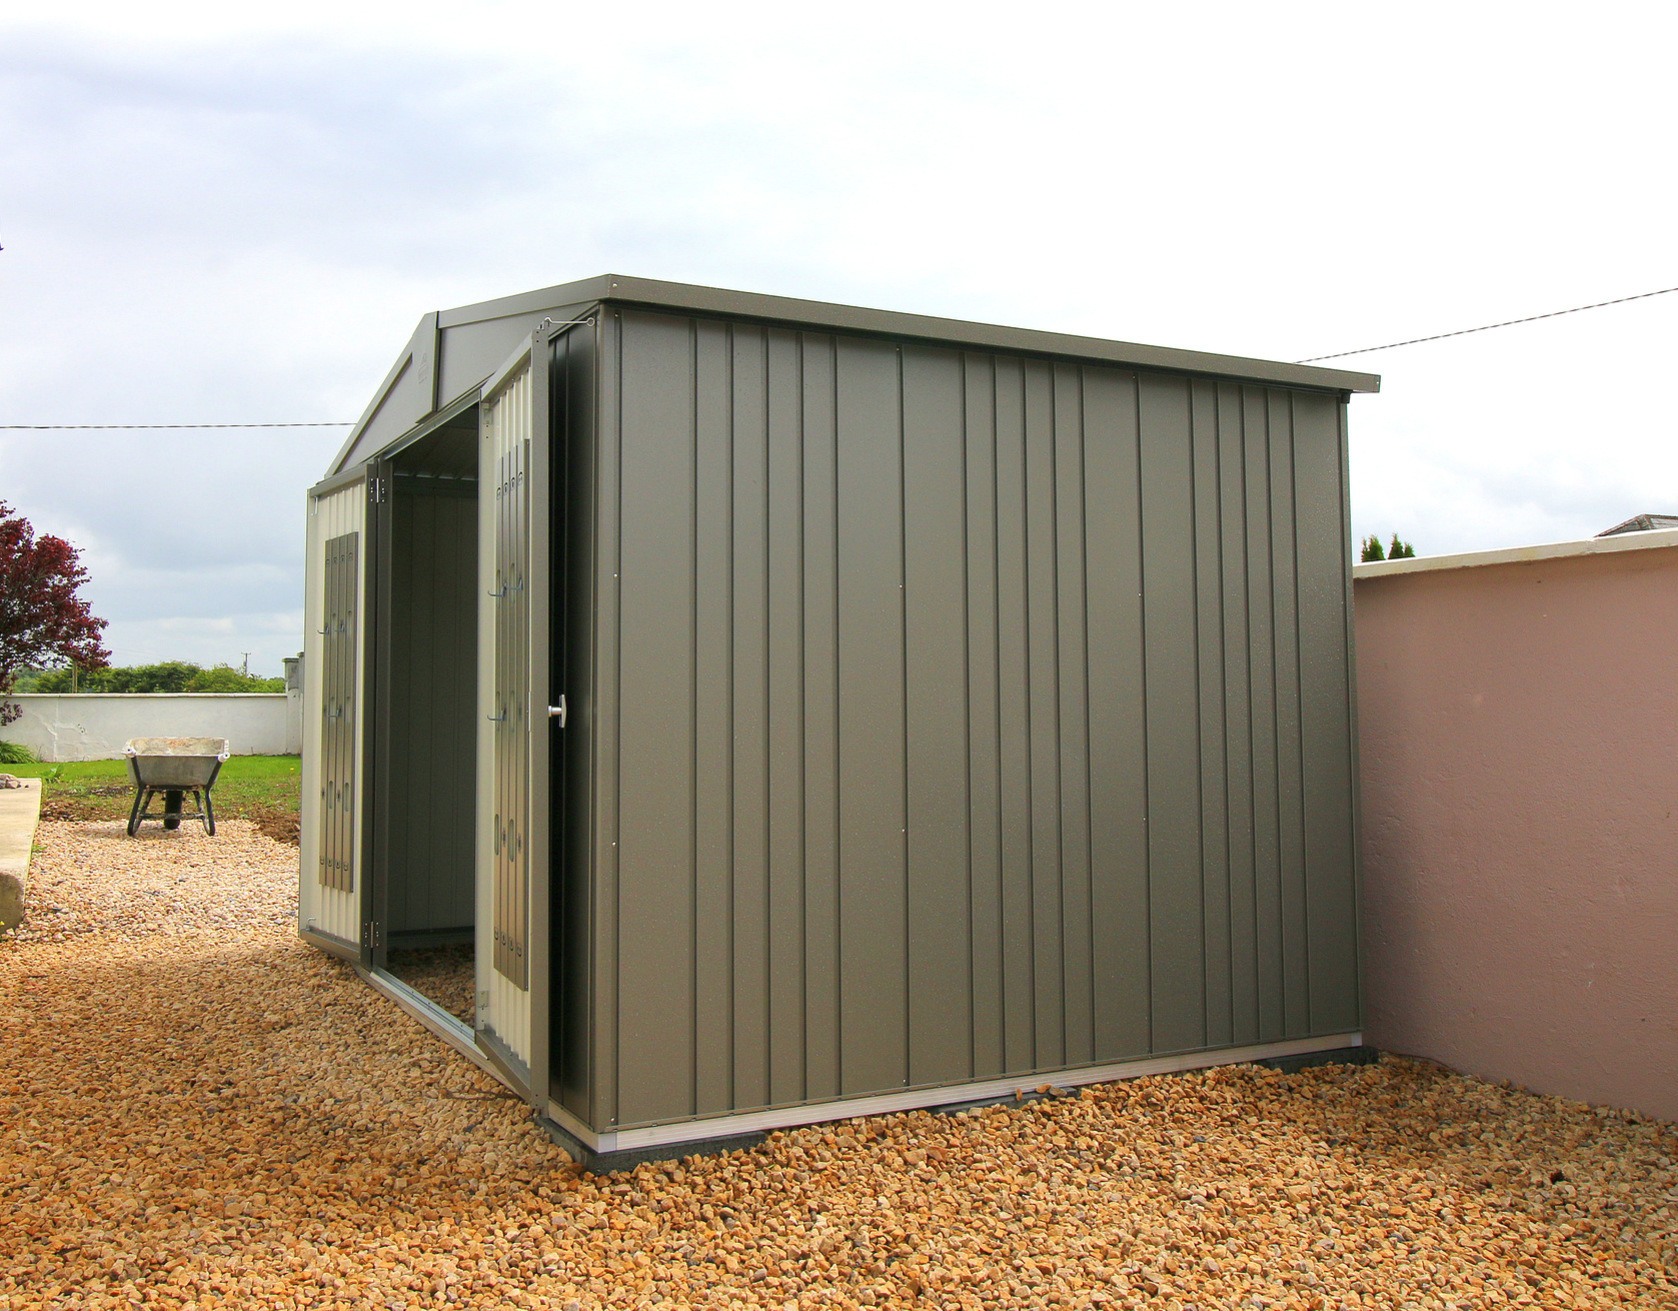 Biohort Europa 5 classic steel garden shed | Supplied + Fitted in Athlone, by Owen Chubb Garden Landscapers, Ireland's #1Biohort Dealer for Value & Service. Tel 087-2306 128